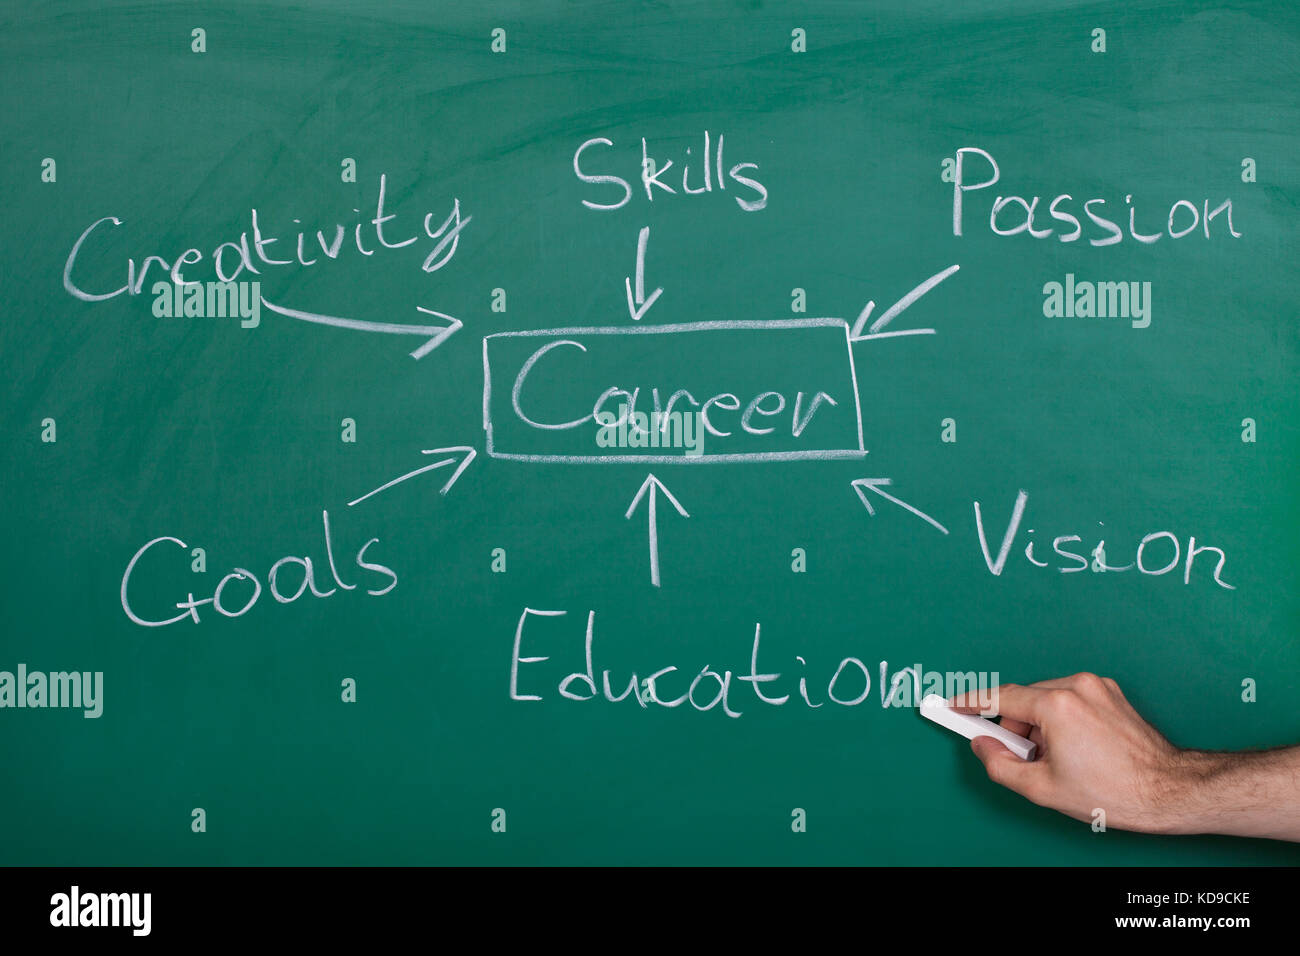 Conceptual Hand Drawn Career Flow Chart On Chalkboard Stock Photo